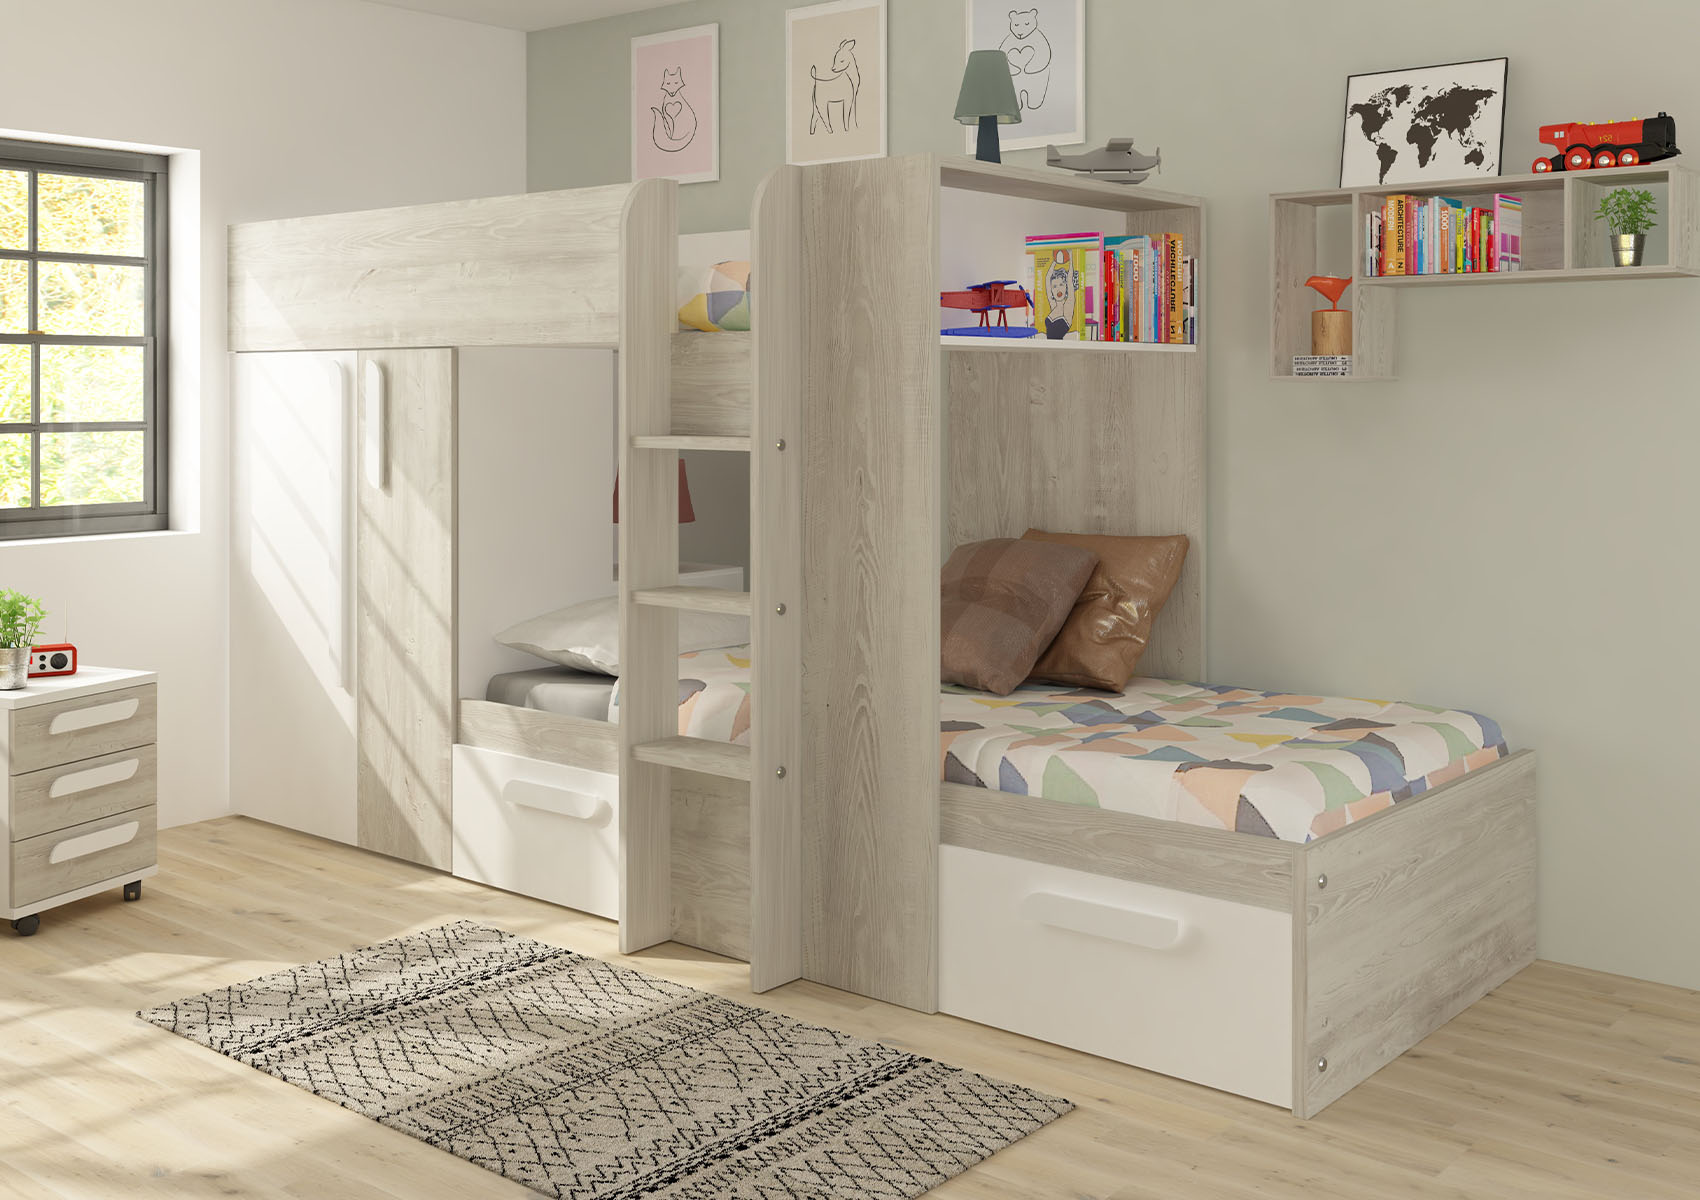 View Barca White Bunkbed Bed Frame Time4Sleep information